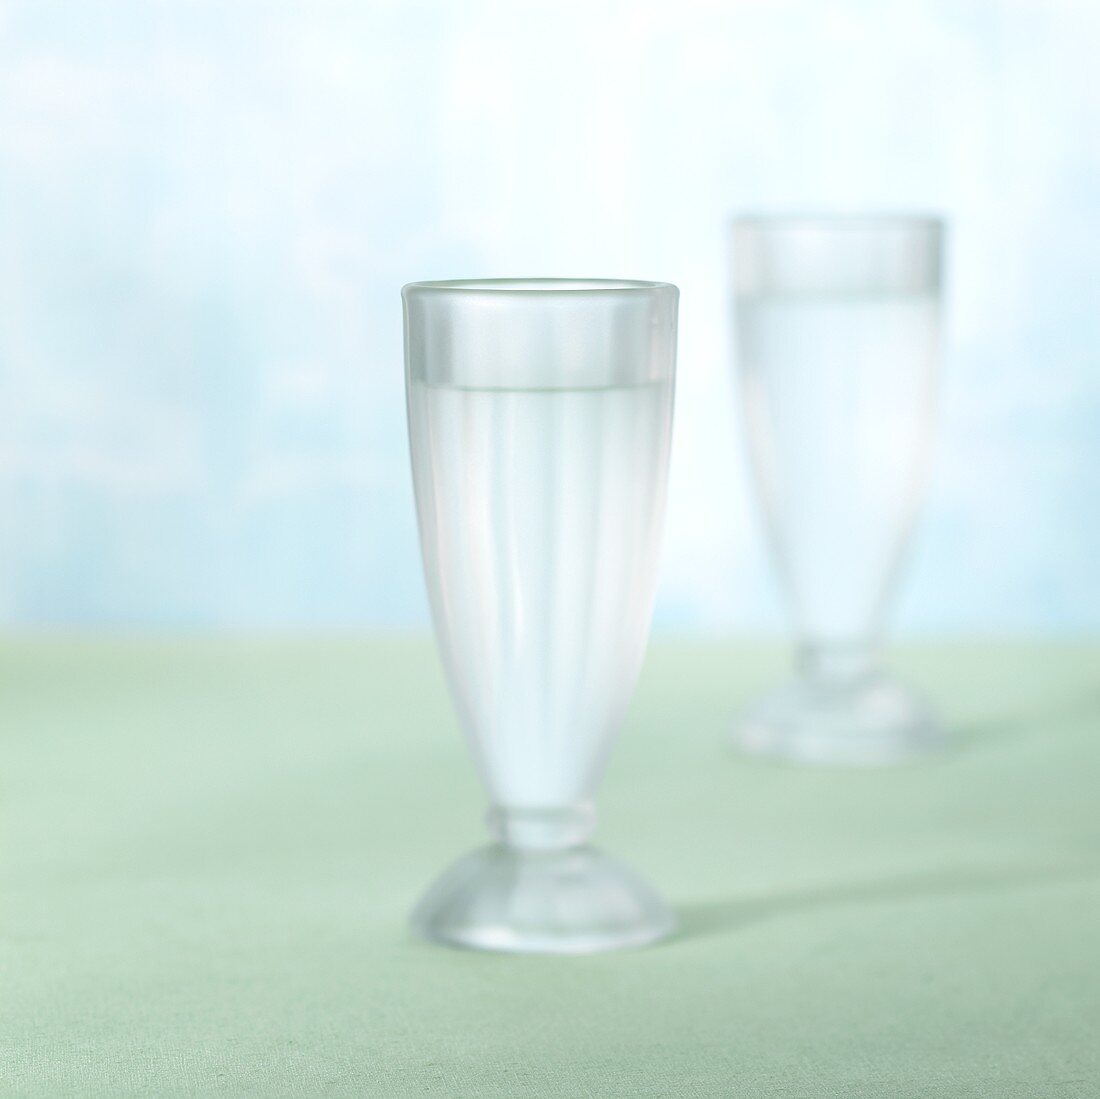 Two glasses of cold water